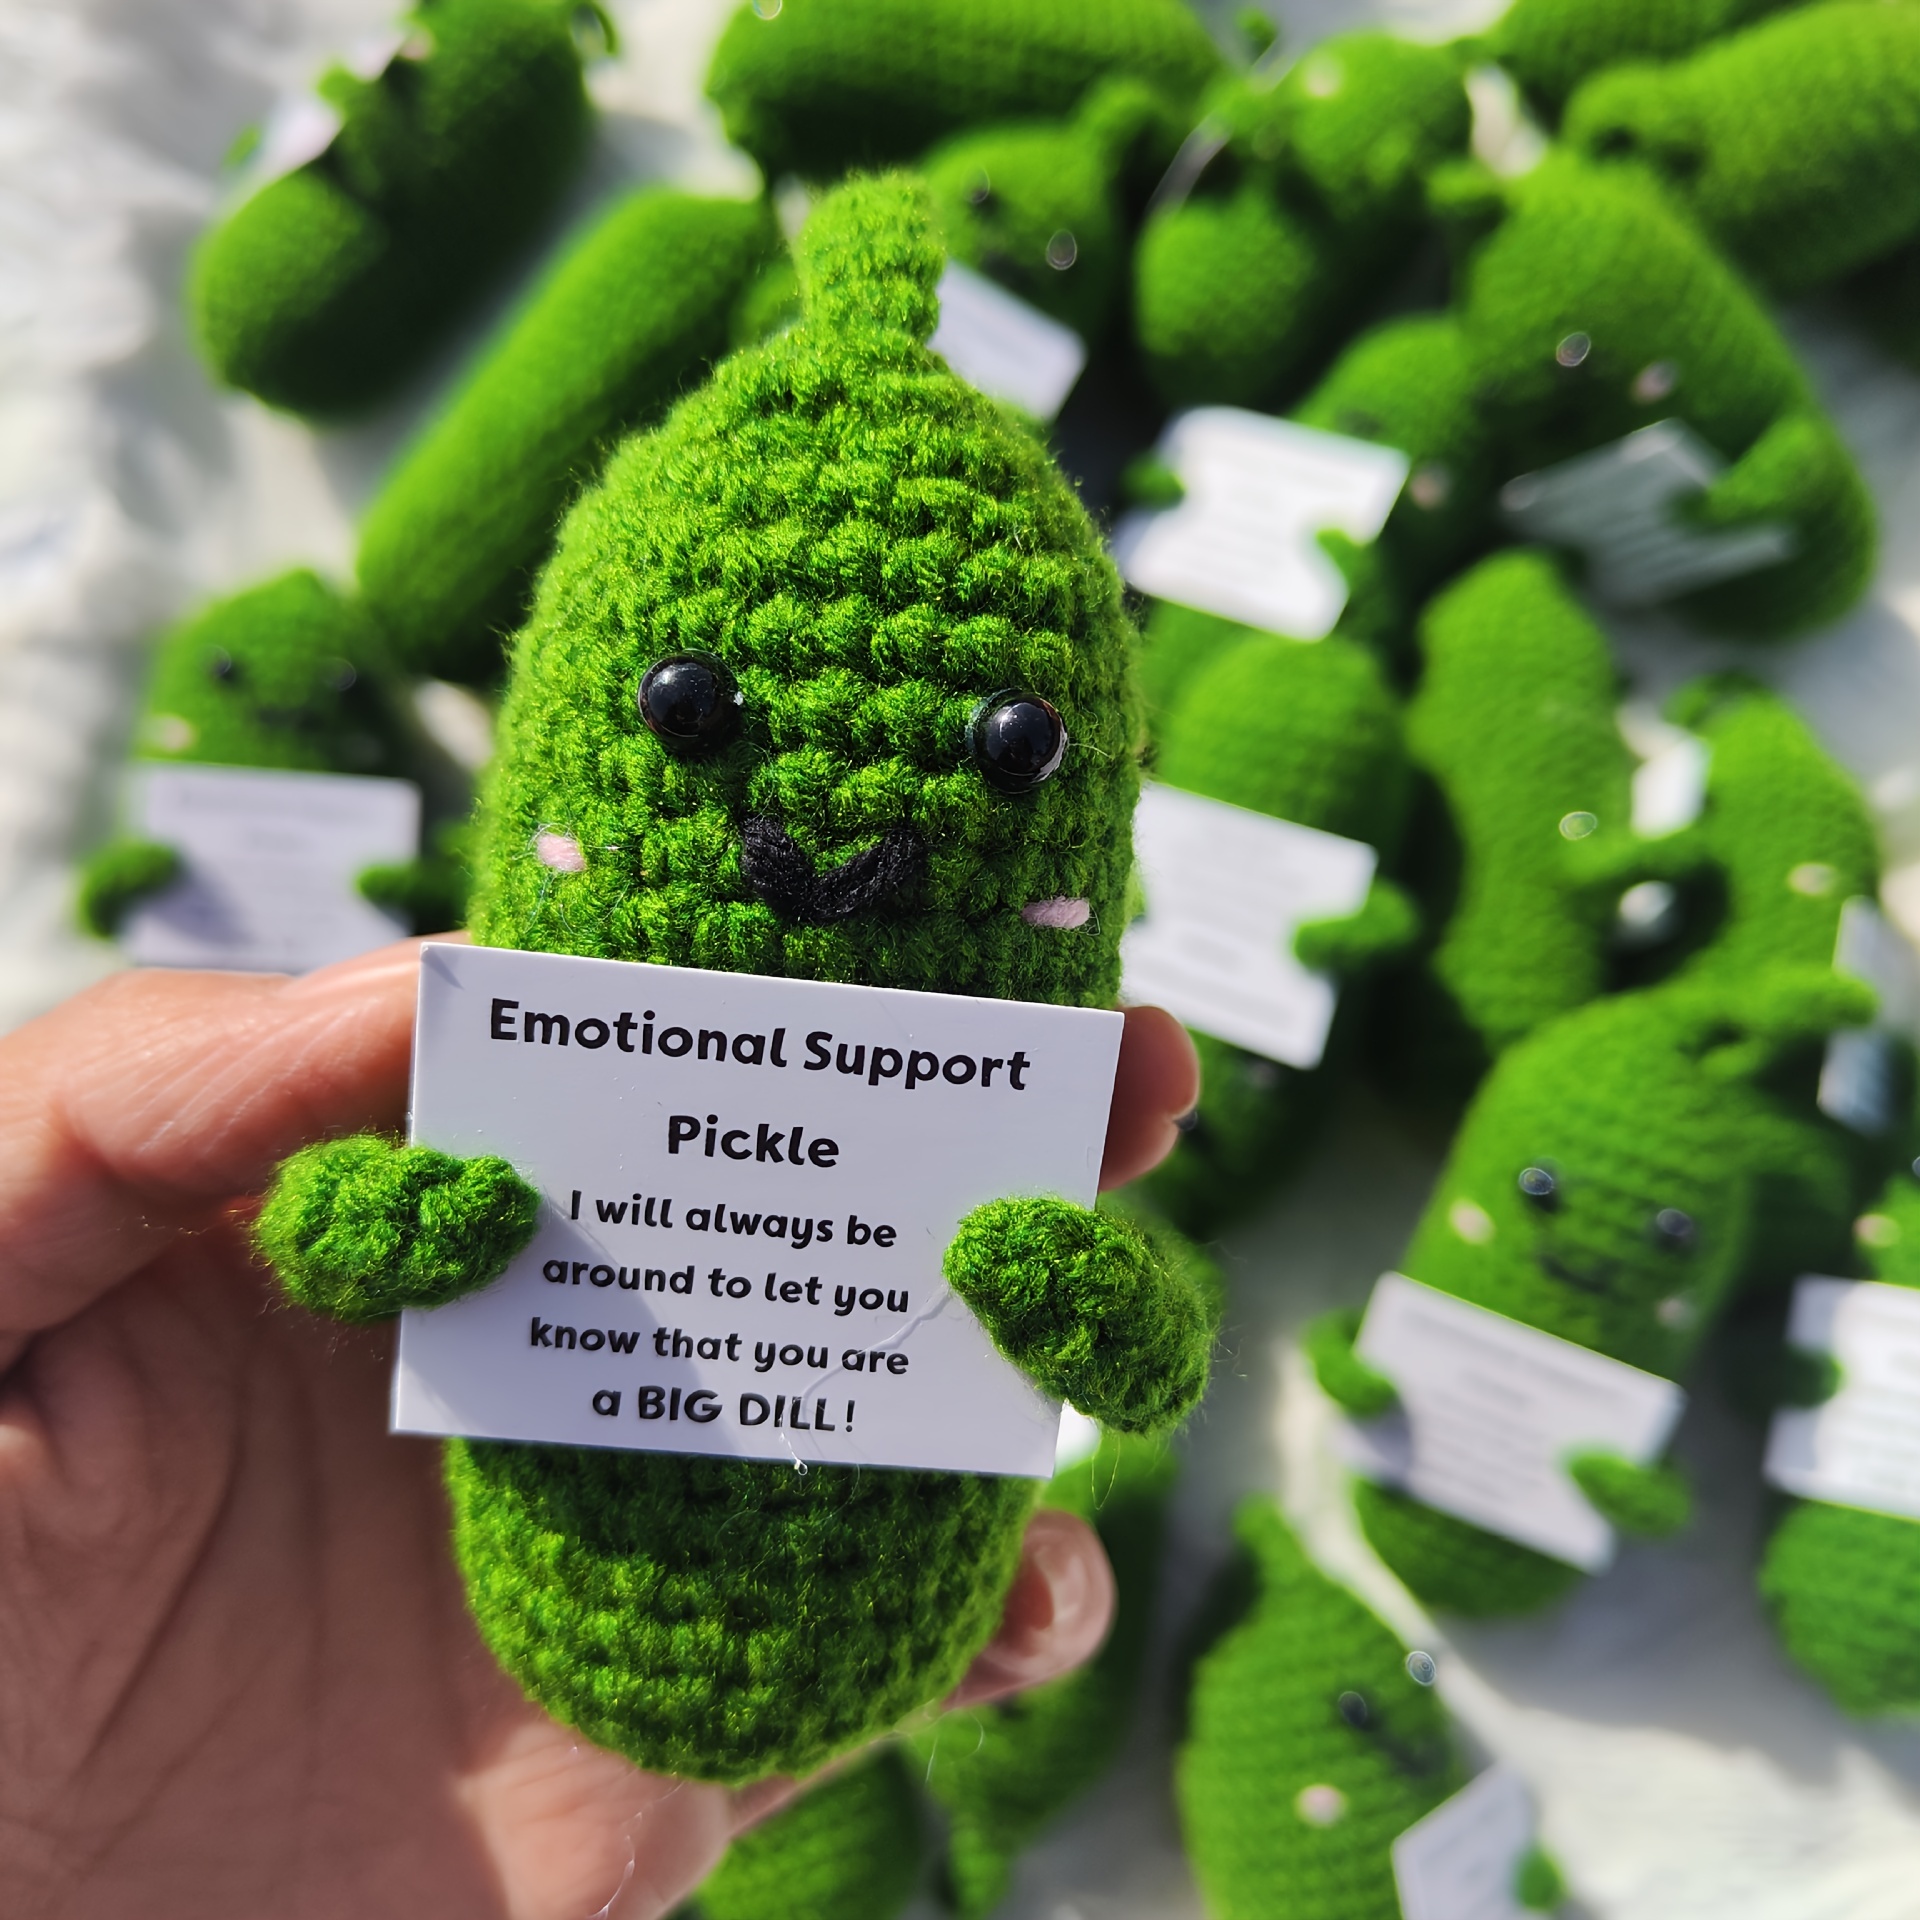 Handmade Emotional Support Pickled Cucumber Gift, Handmade Crochet  Emotional Support Pickles, Cute Crochet Pickled Cucumber Knitting Doll,  Christmas Pickle Ornament Gift 